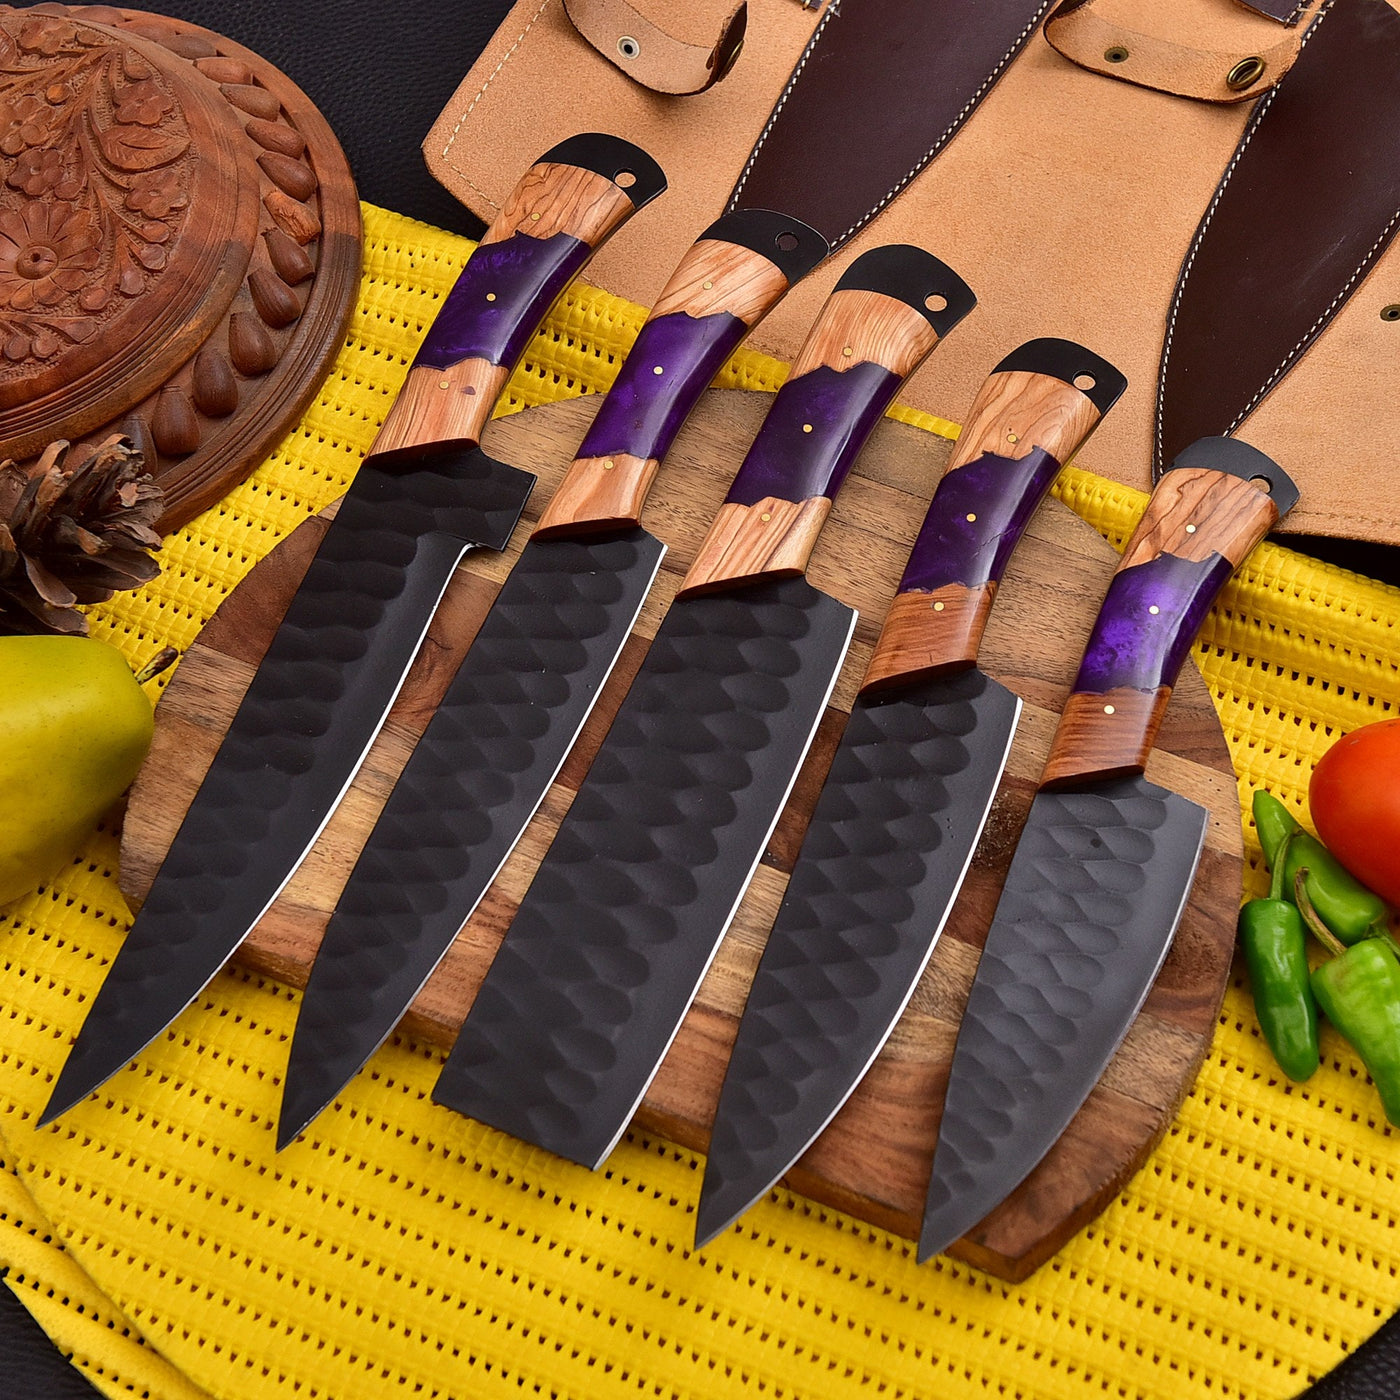 Premium Handmade Chef Knife Set of 5 with wood and Resin handles